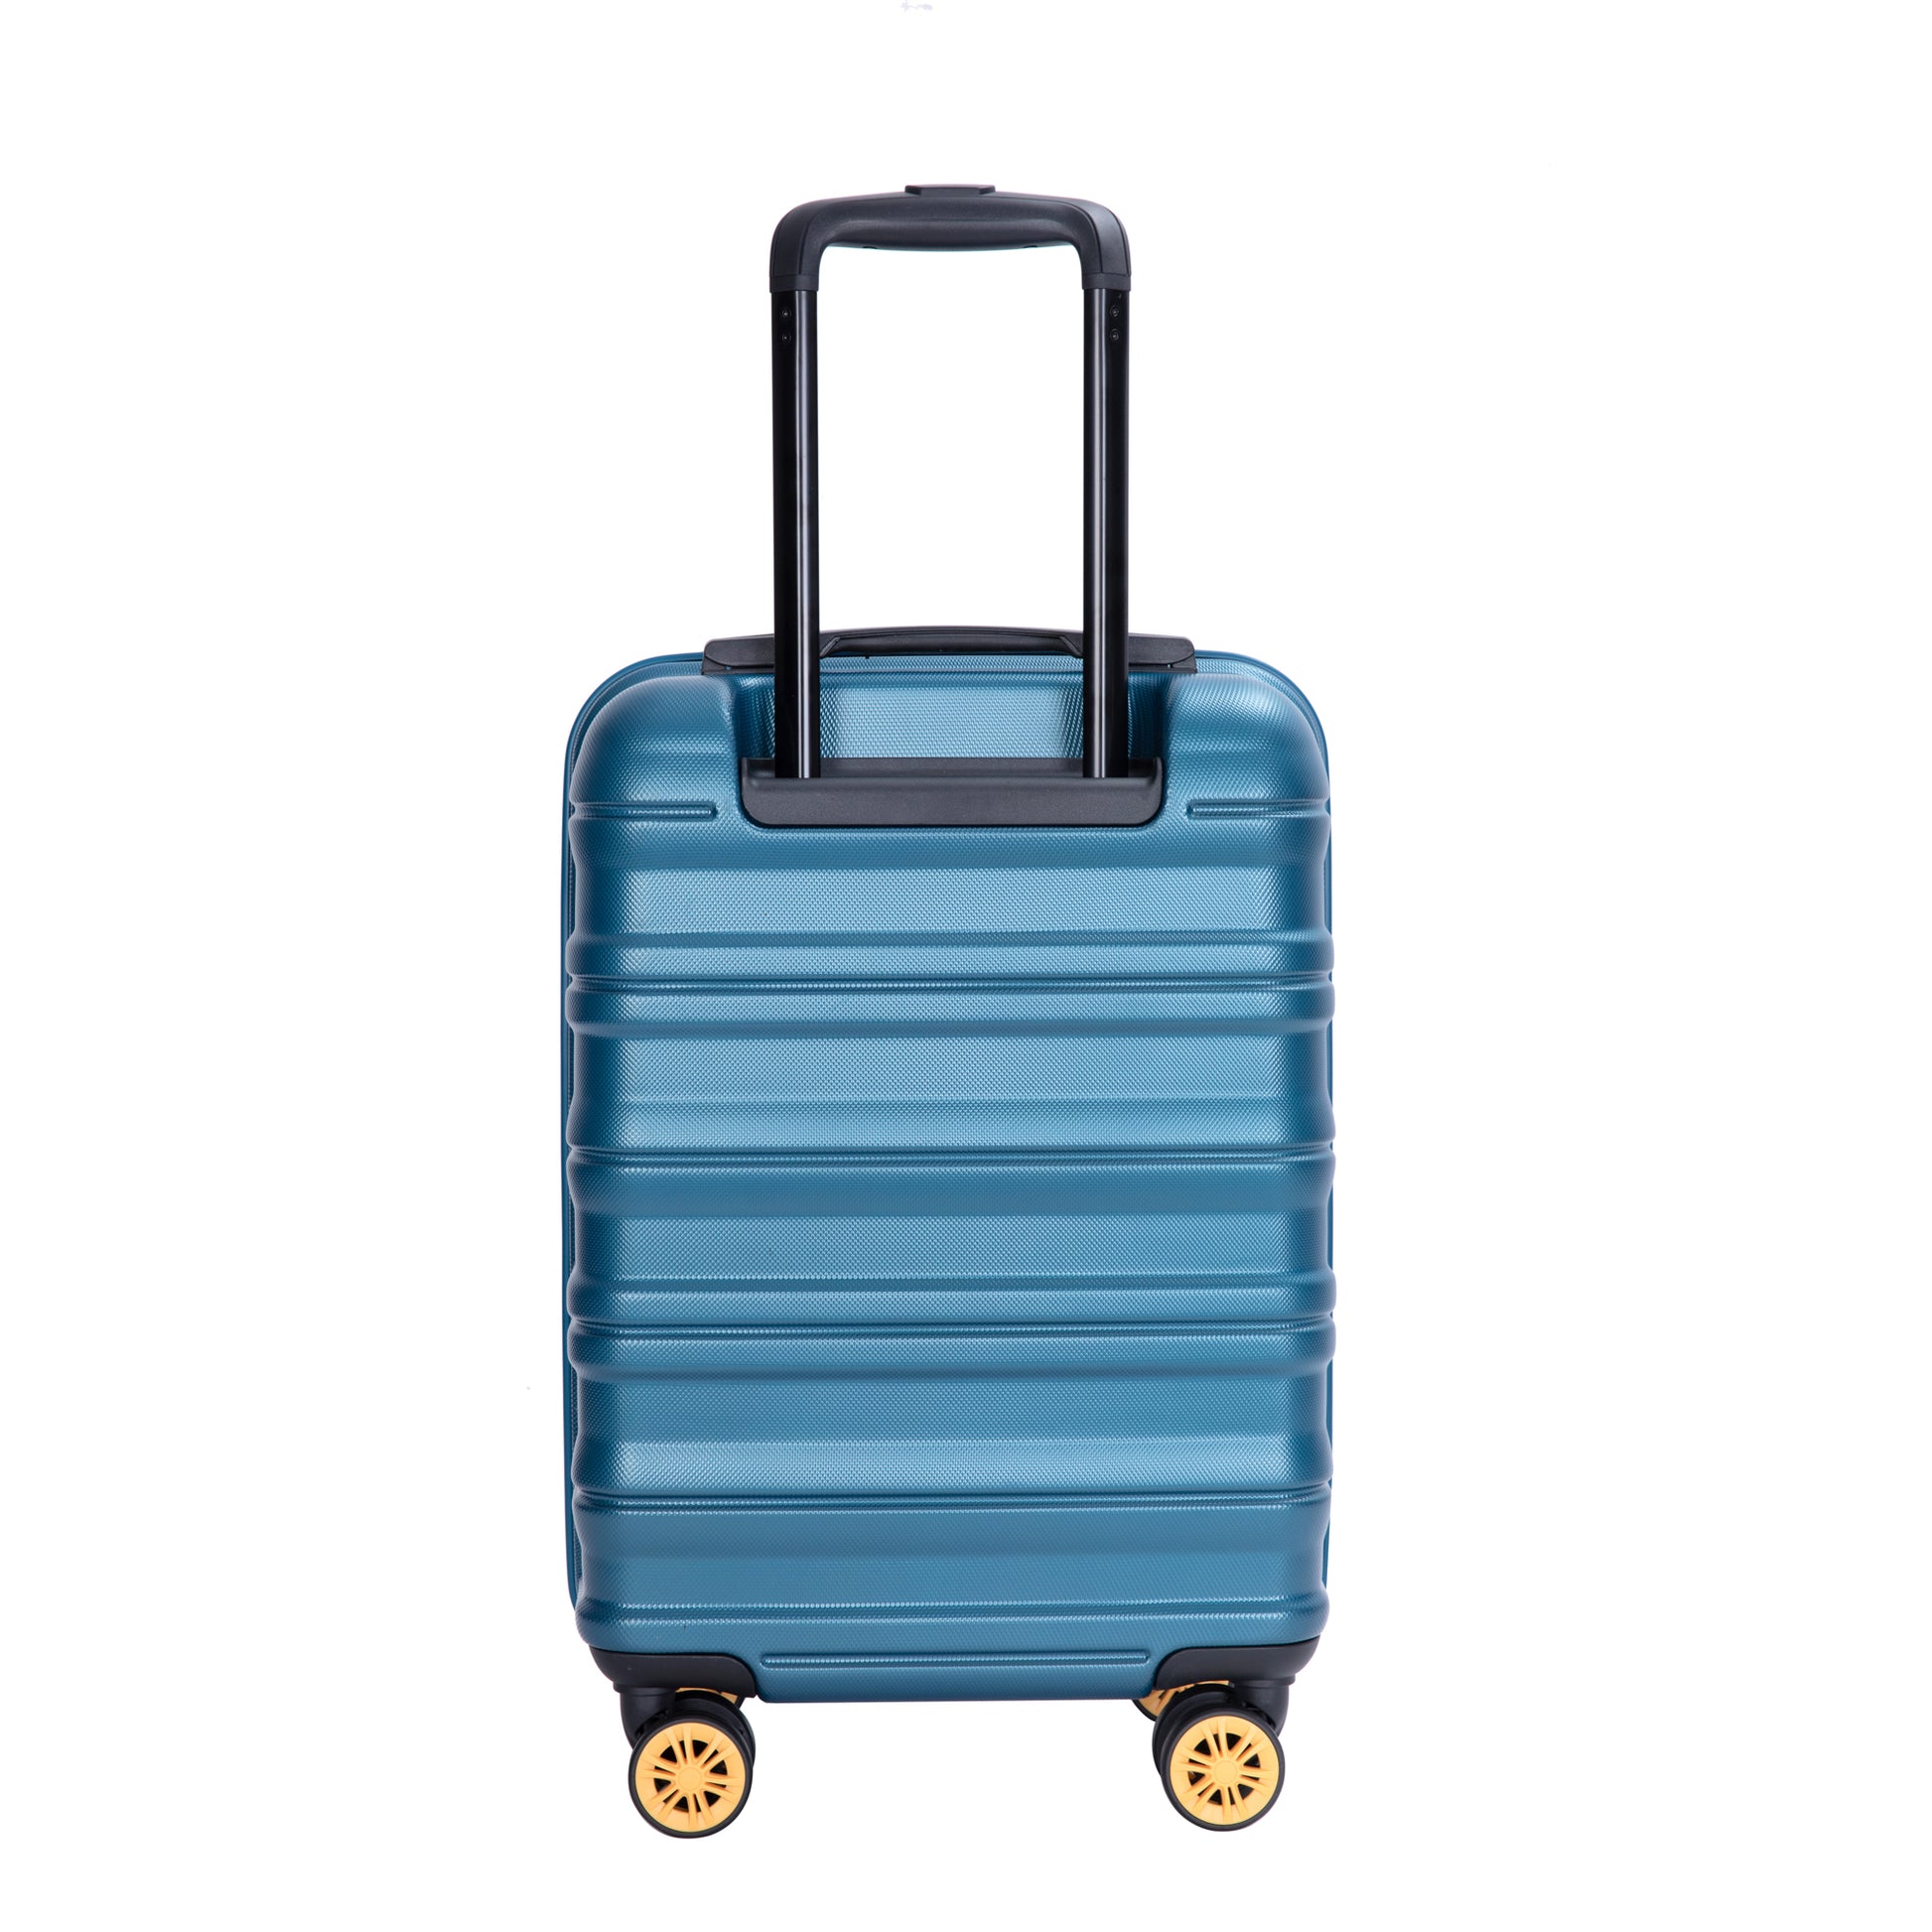 Carry On Luggage Airline Approved18.5" Carry On blue-abs+pc